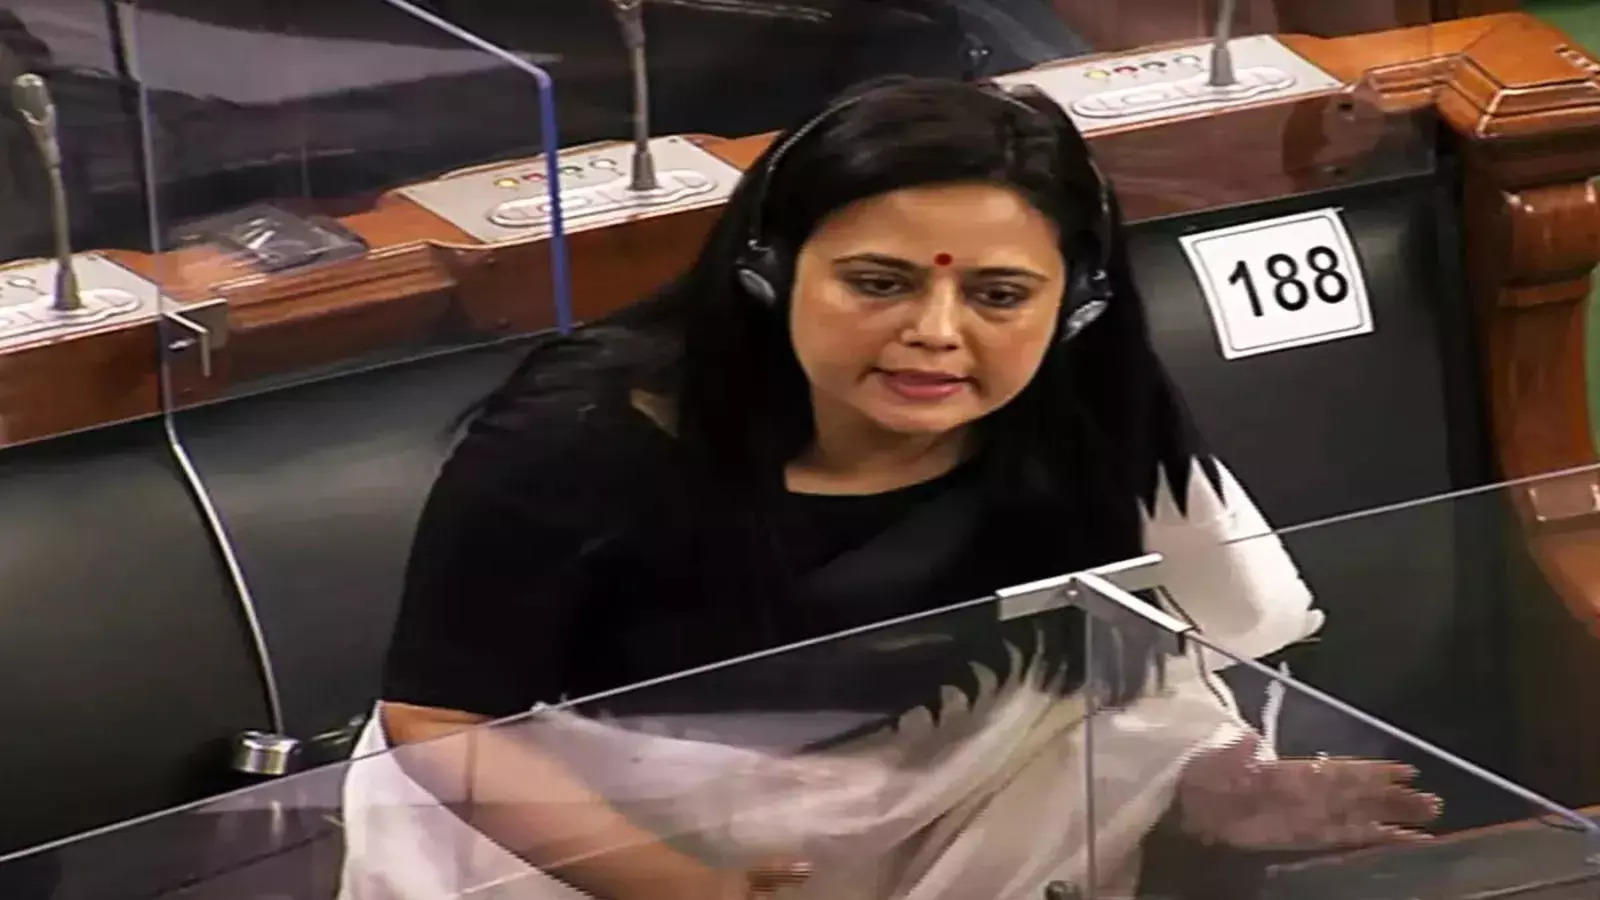 Cash For Query Scandal: BJP MP Moves Lokpal Against Mahua Moitra, India  News